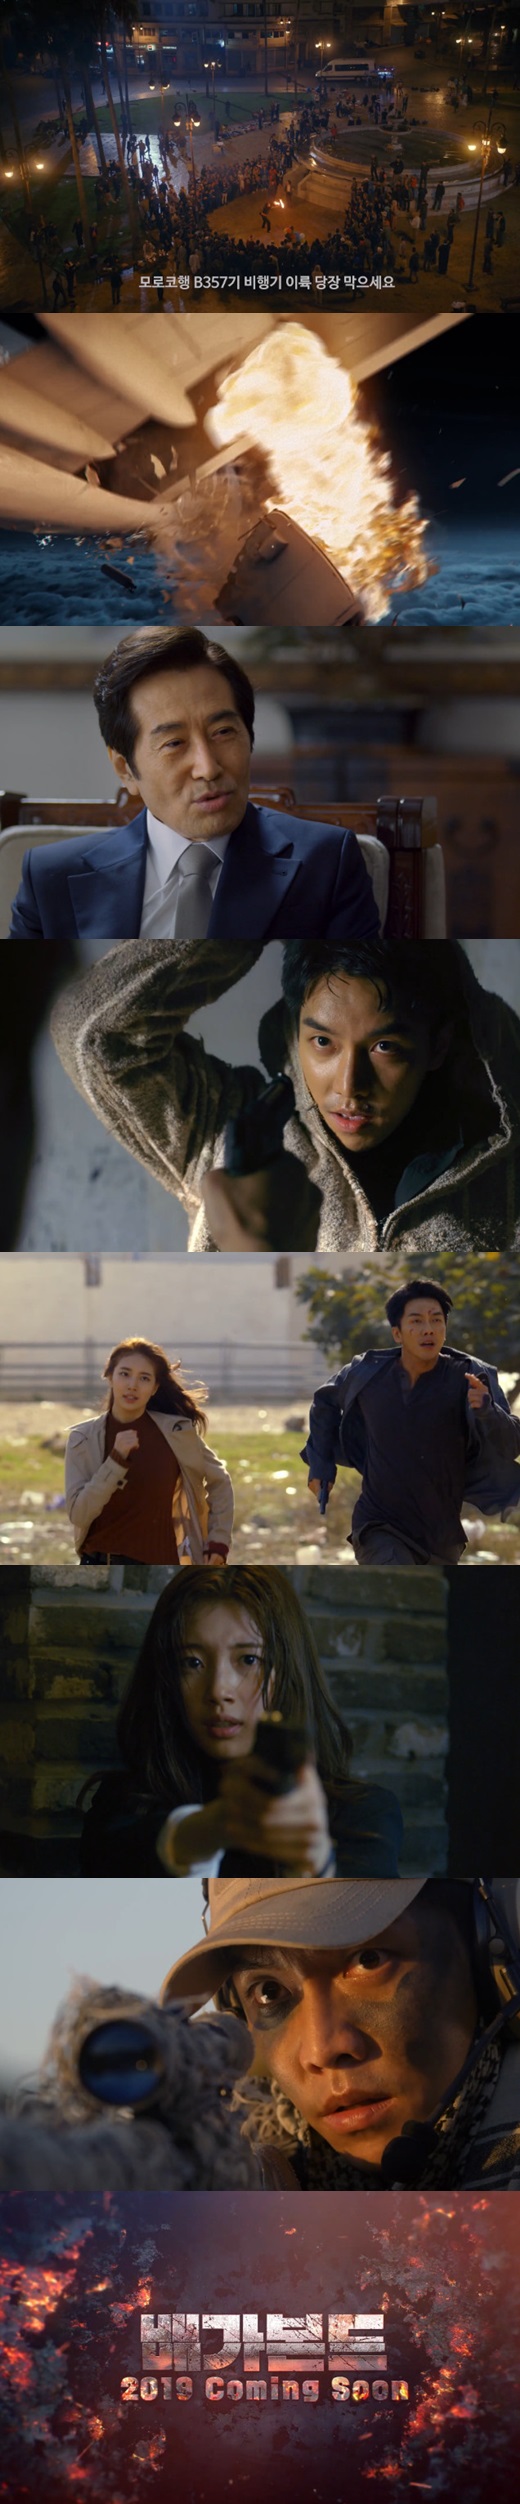 A first-round Teaser trailer for Vagabond starring Bae Suzy and Lee Seung-gi has been released.The first Teaser trailer of SBSs new drama Vagabond (playplayplay by Jang Young-chul, Jung Kyung-soon, Yoo In-sik) was released on the 31st, and netizens hot interest is continuing.The first teaser of Vagabond, which was released through the portal site, is a short video for about a minute, which solves the curiosity about Vagabond hidden in the veil.Especially, the colorful scale, the roar of Lee Seung-gi, and the appearance of Bae Suzy are briefly appearing, raising expectations.Inside the video is Lee Seung-gi, who is trying to prevent a sudden Planes crash, and Baek Yoon-sik, who has something secret.The Planes crash killed 211 people, says Bae Suzy.Especially at the end of the video, Lee Seung-gi said, Who the hell are they? Why are innocent people dead? Why is my nephew dead!I hear a crying voice and catch my eye.Meanwhile, Vagabond is a drama depicting the process of a man involved in a passenger plane crash digging into a huge national corruption found in a concealed truth.It will be broadcast for the first time in May.